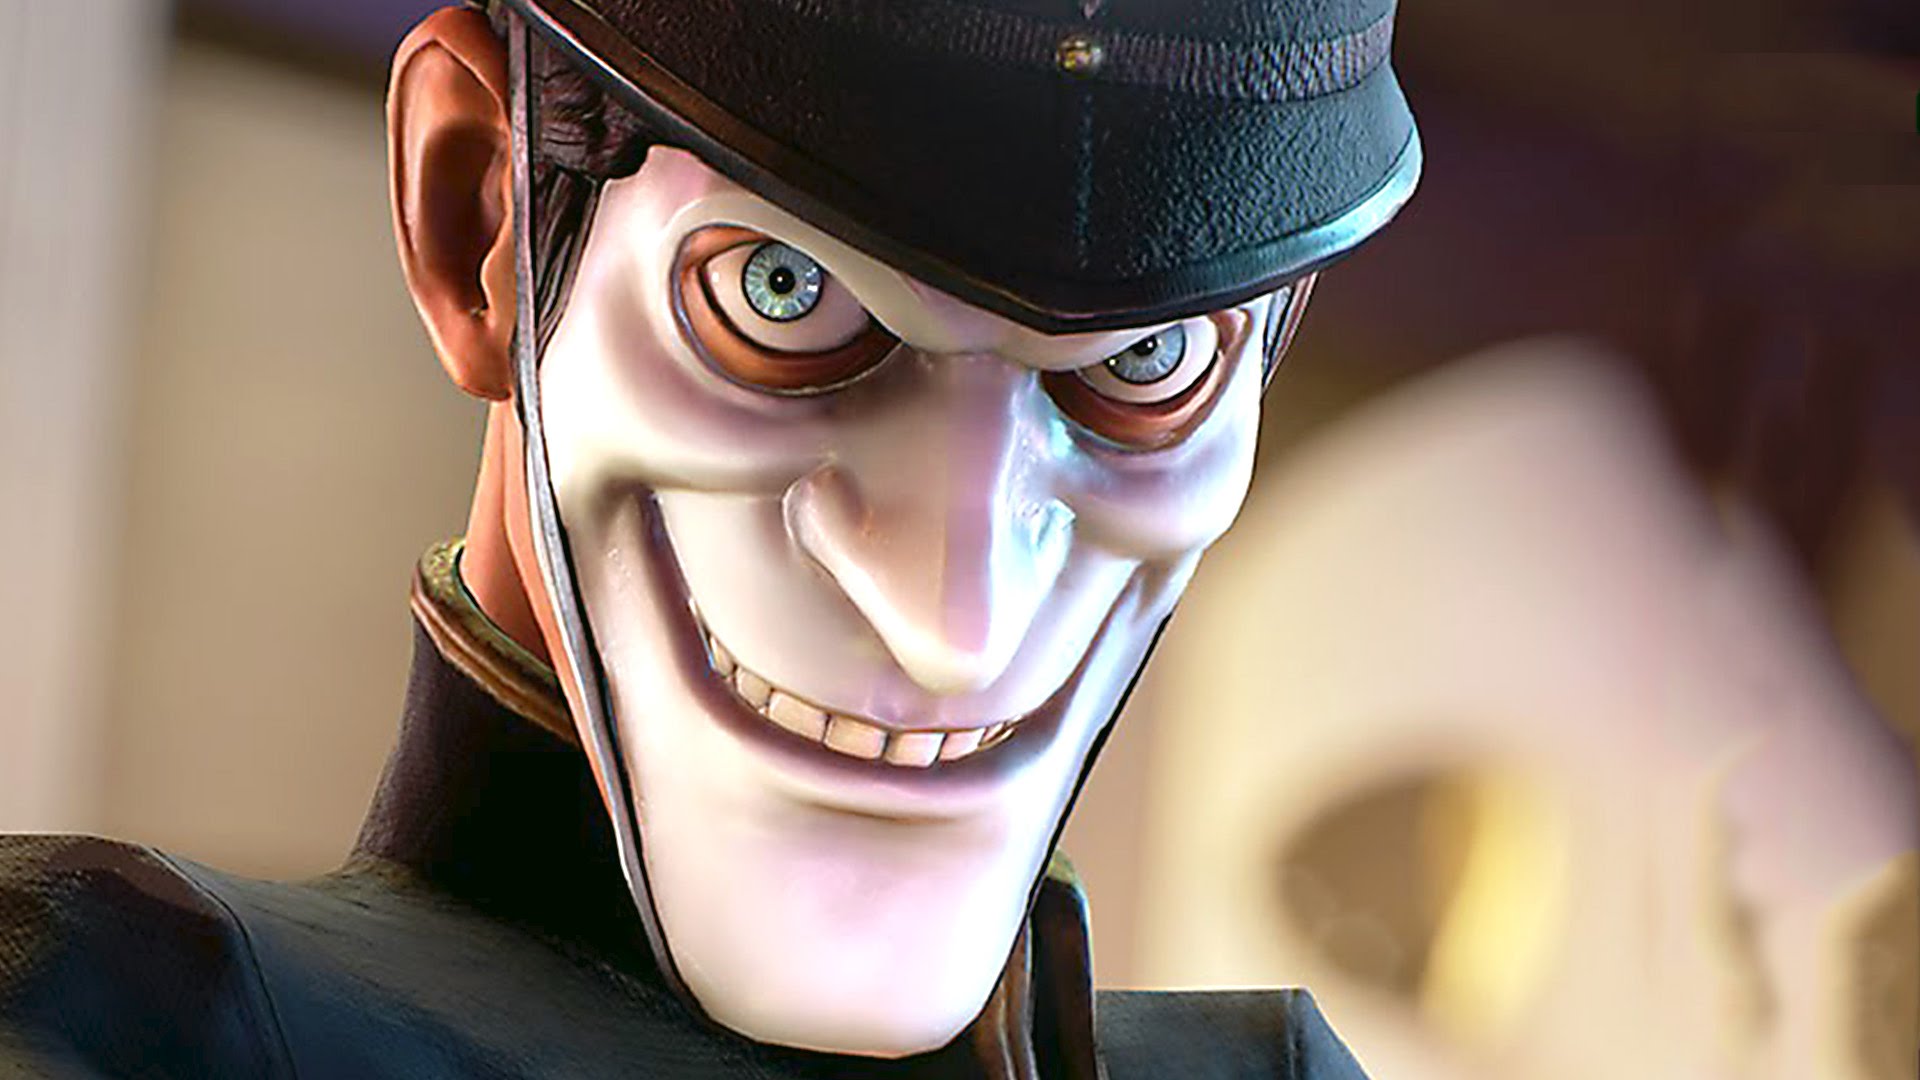 Amazing We Happy Few Pictures & Backgrounds